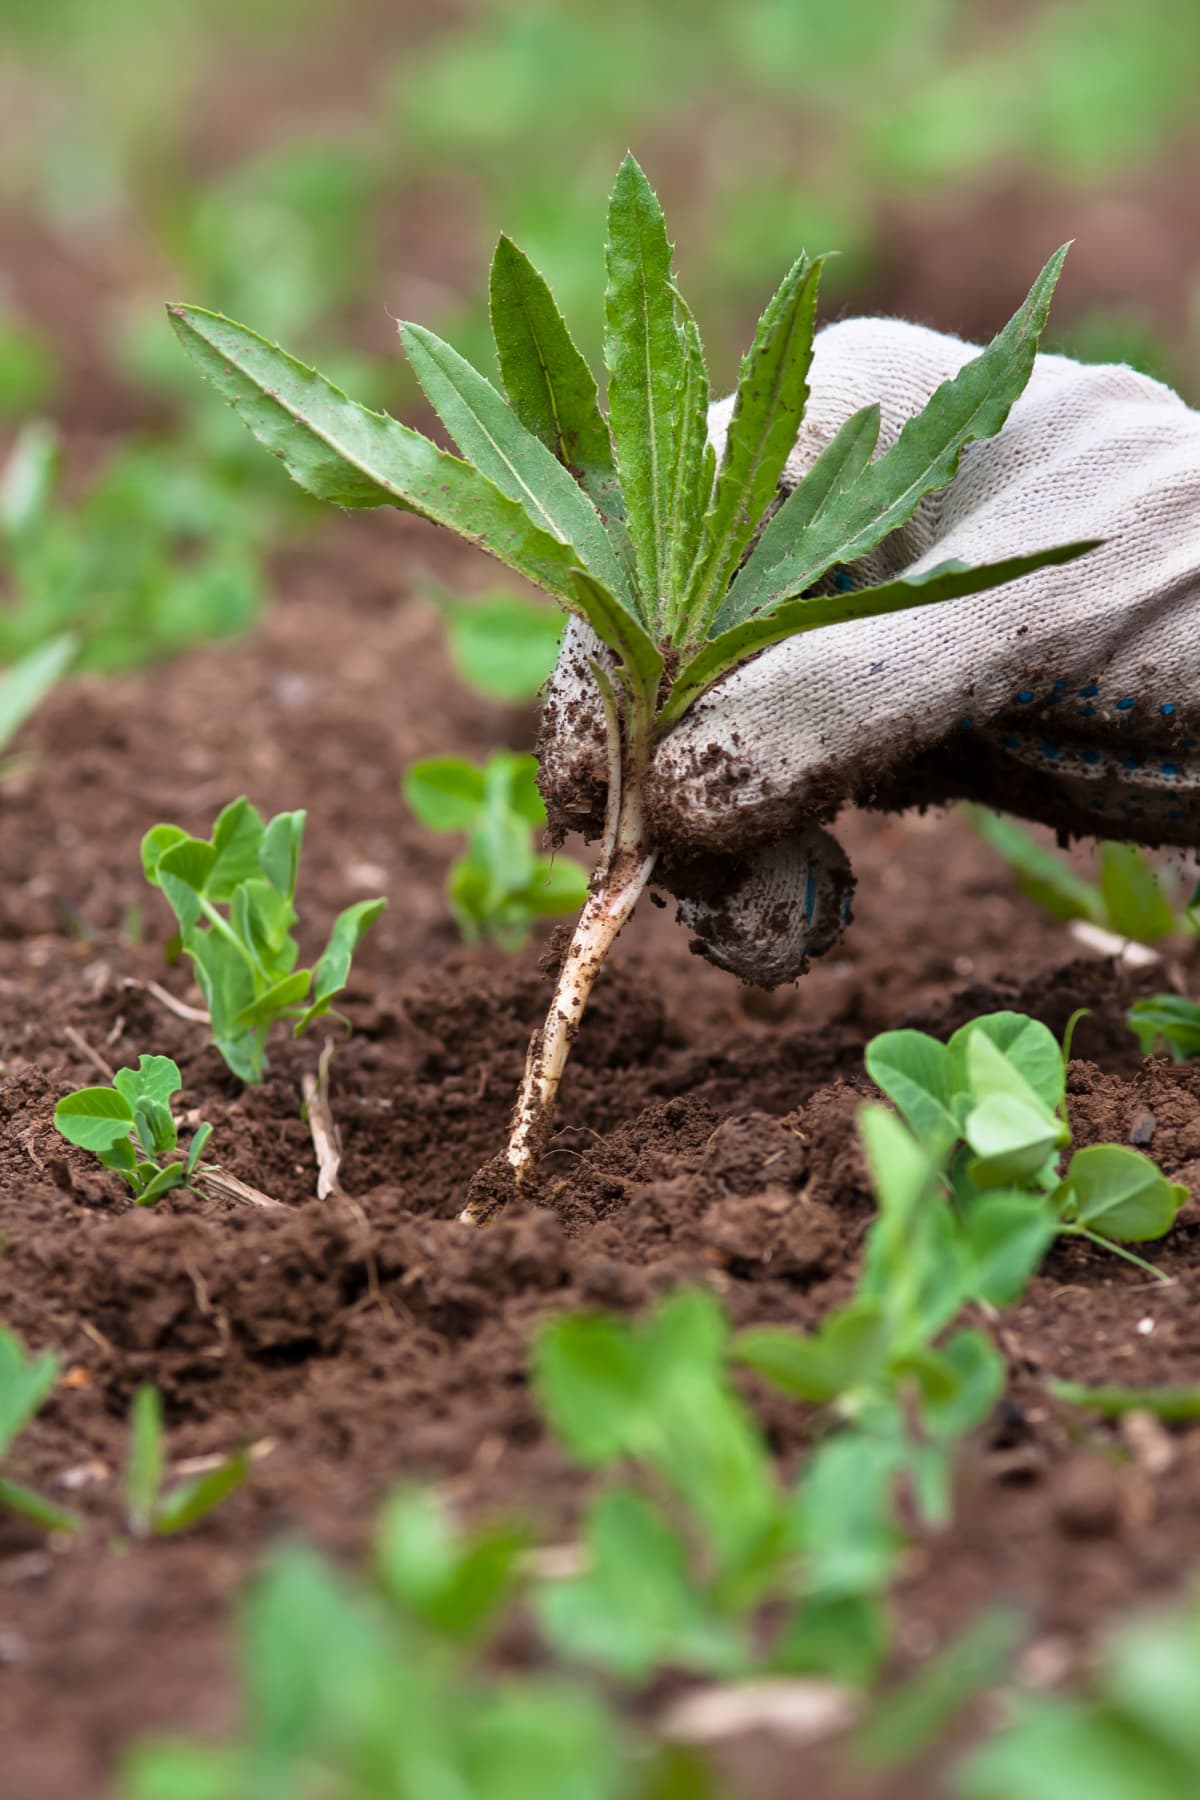 A person pulling out weeds from the soil